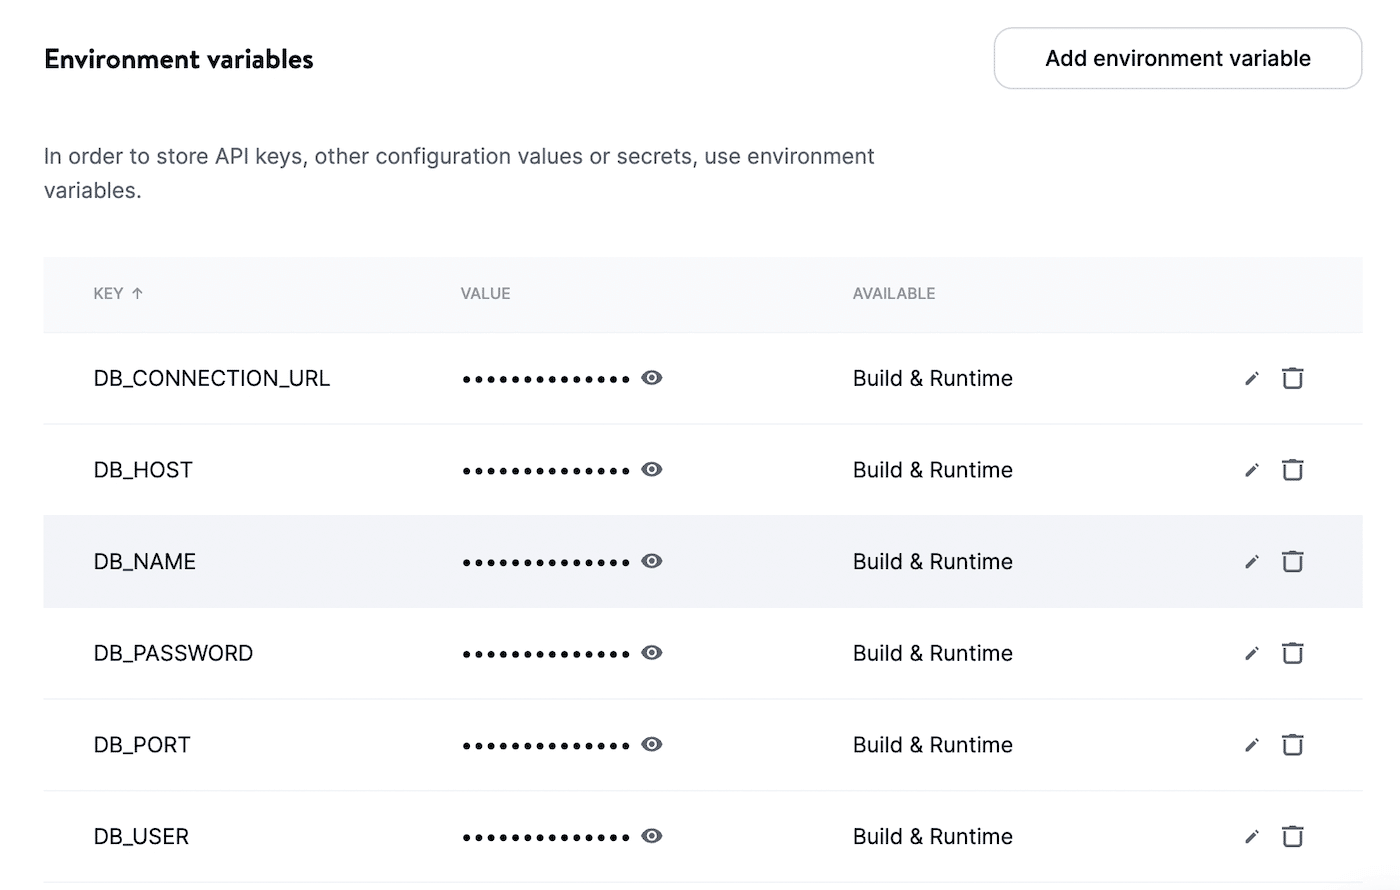 Environment variables for your application.